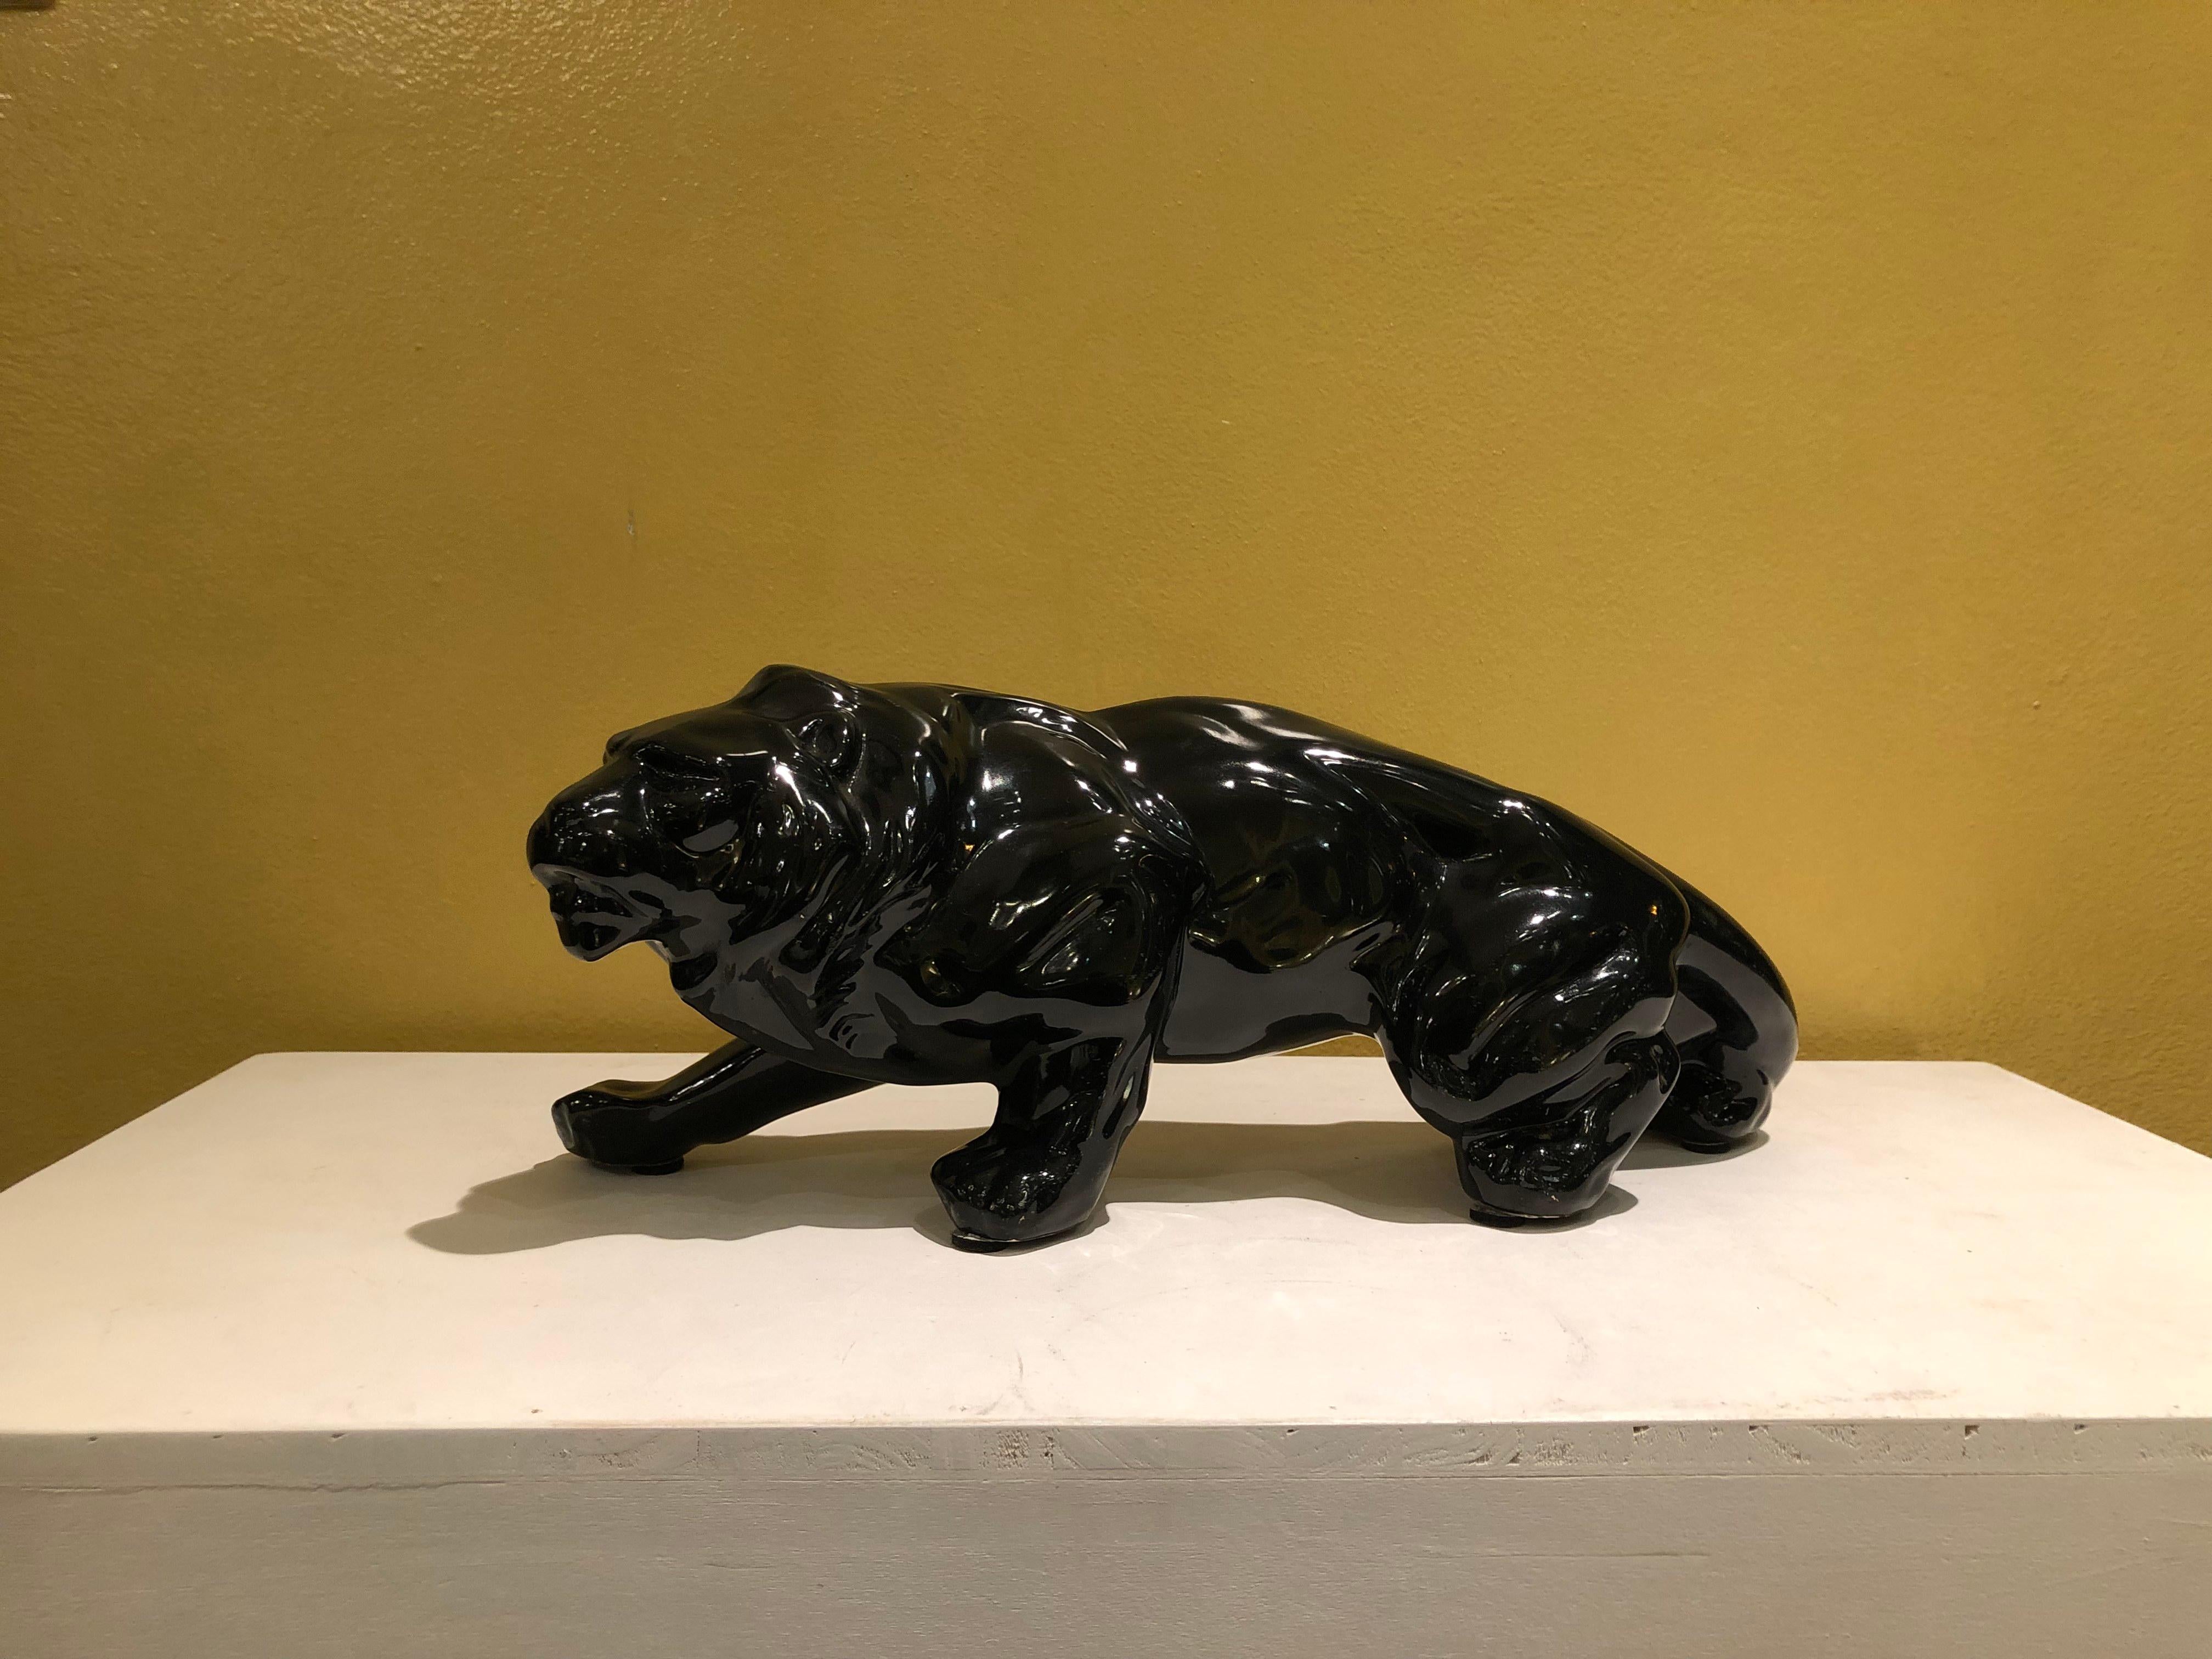 Black ceramic Animalier lion sculpture.

From Italy from 1950s period, this sculpture represents a lion during its hunting time. The ceramic works underlines the animal's muscles and force.

Size: W 50 cm, D 12 cm, H 19 cm- 19.68